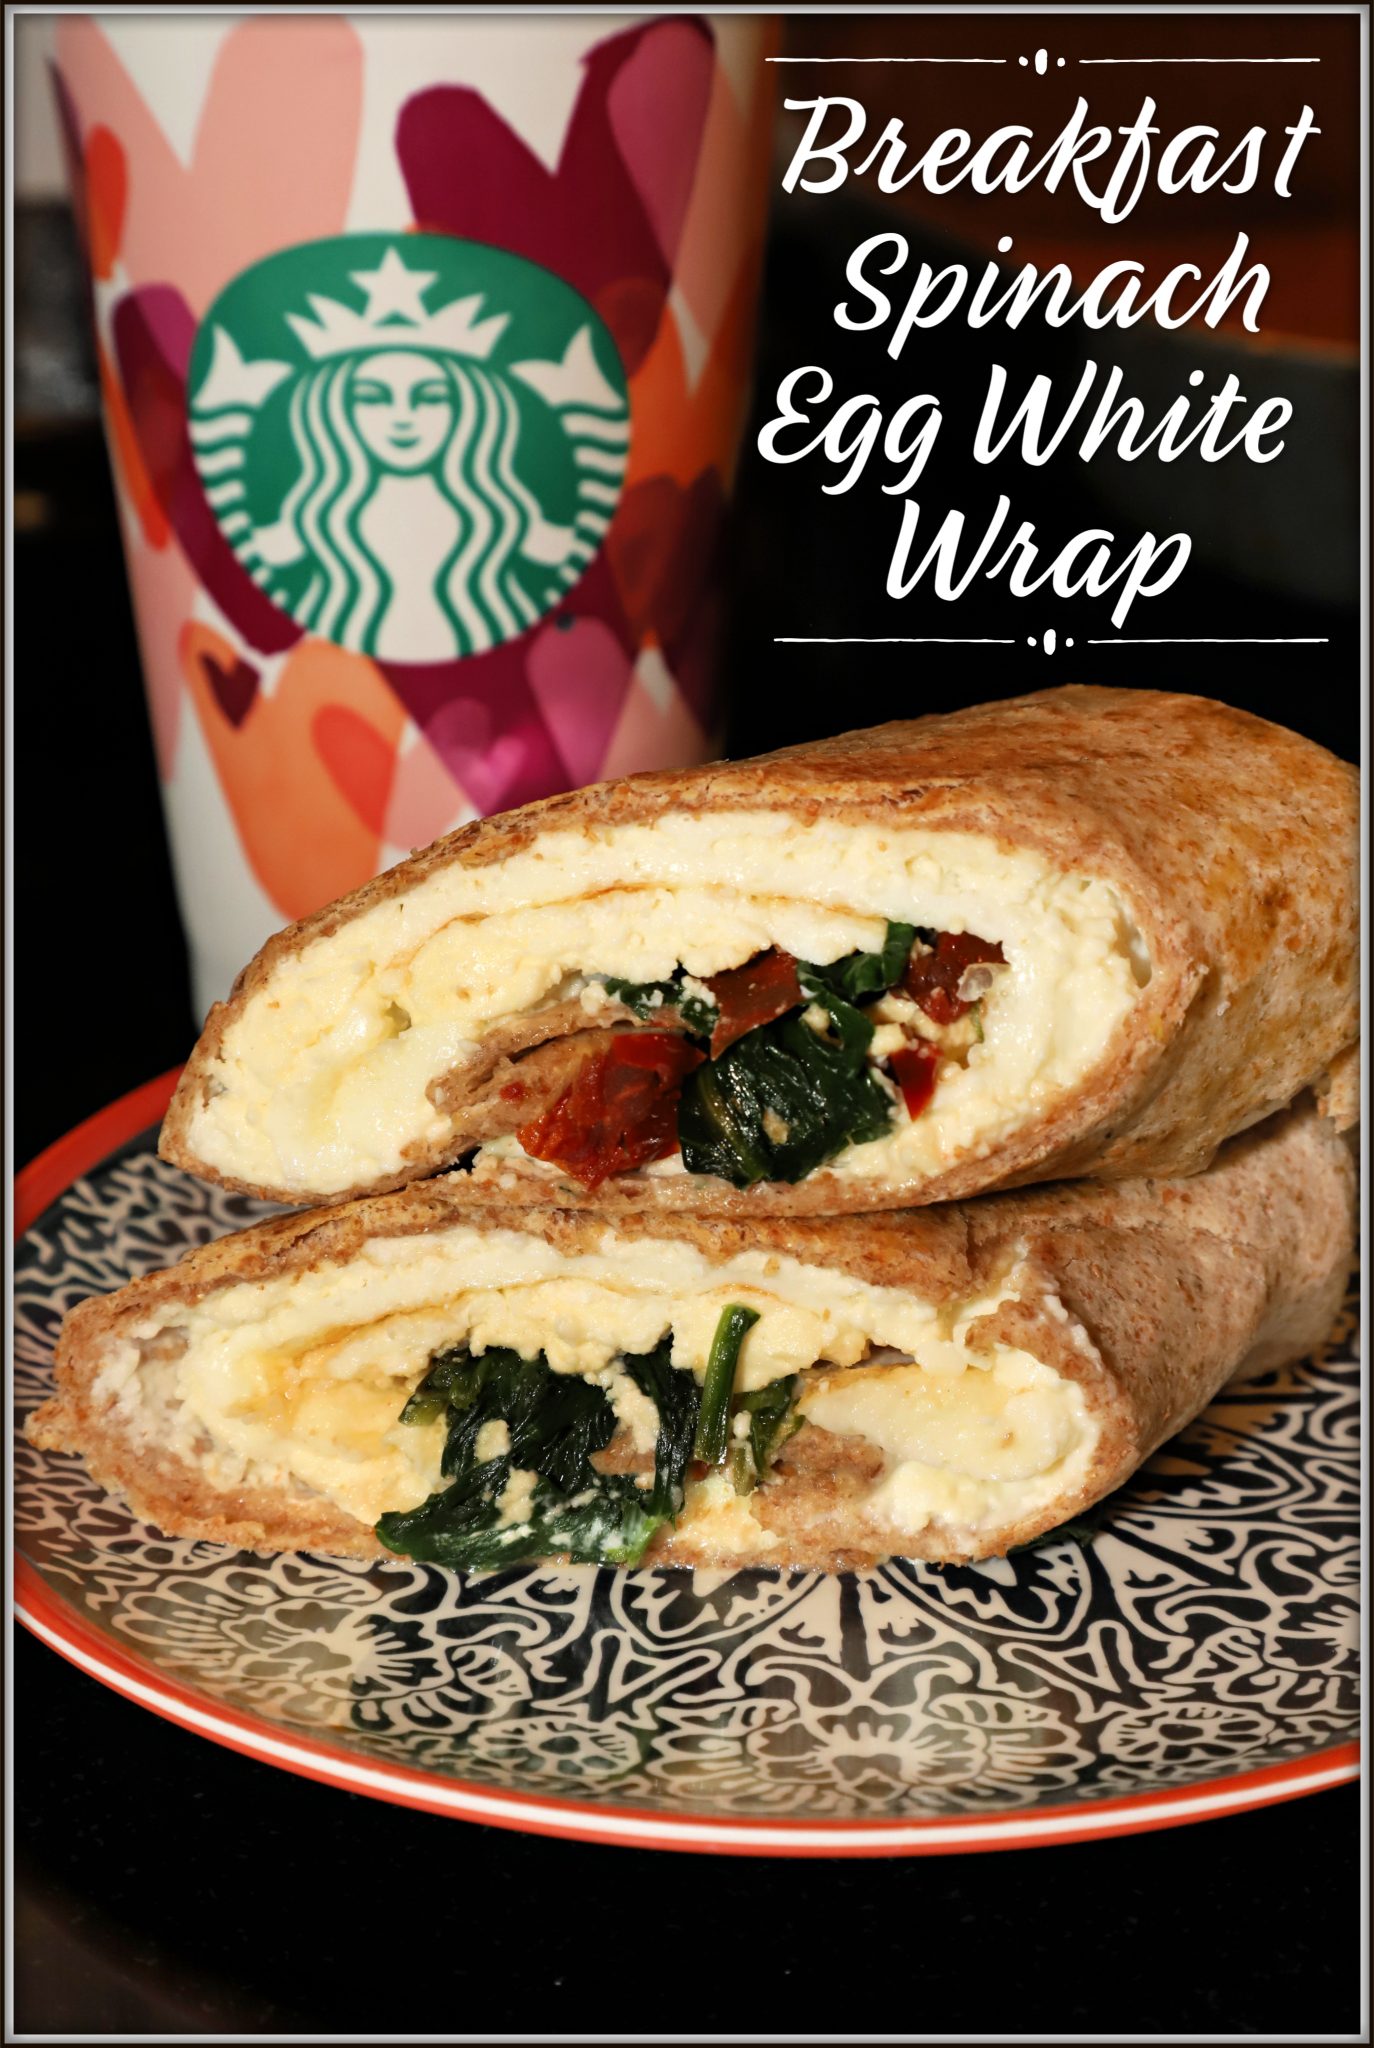 Egg, Spinach and Feta Breakfast Wrap - Eating Bird Food